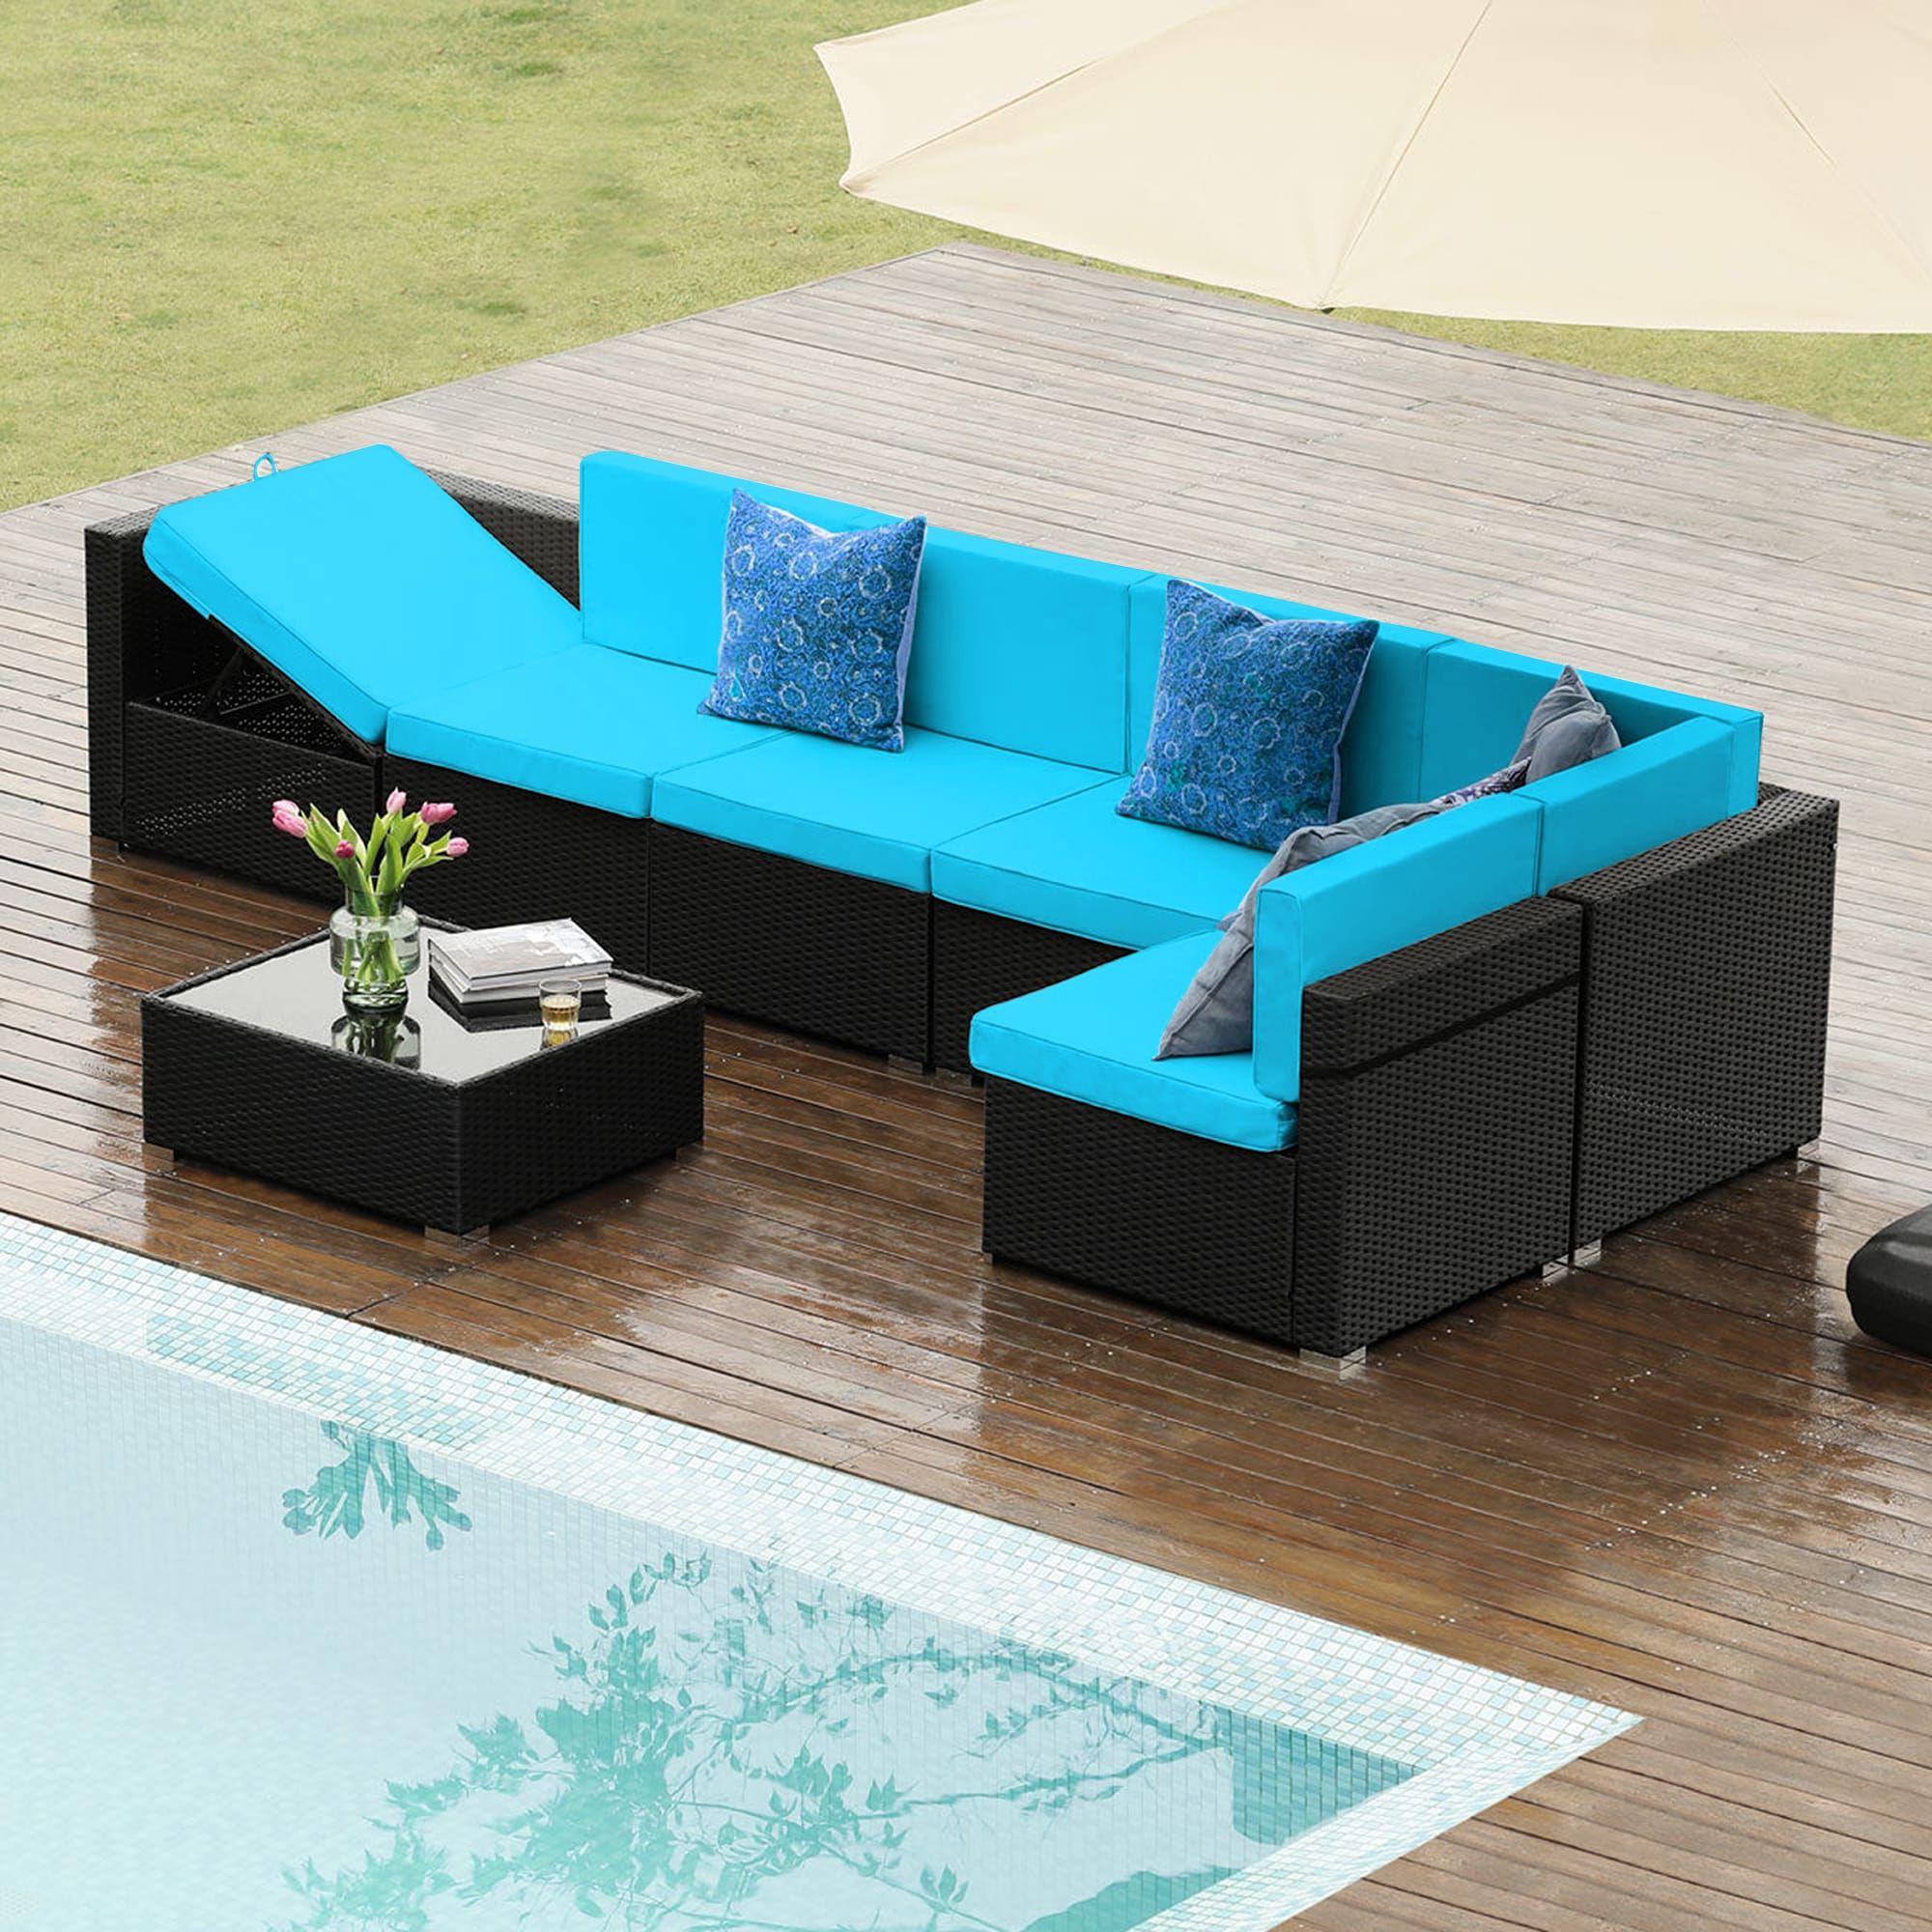 Side Table Iron Frame Patio Furniture Set Regarding Fashionable 7  Piece Patio Conversation Set Rattan Outdoor Sectional With Blue  Cushion(s) And Iron Frame In The Patio Sectionals & Sofas Department At  Lowes (View 6 of 15)